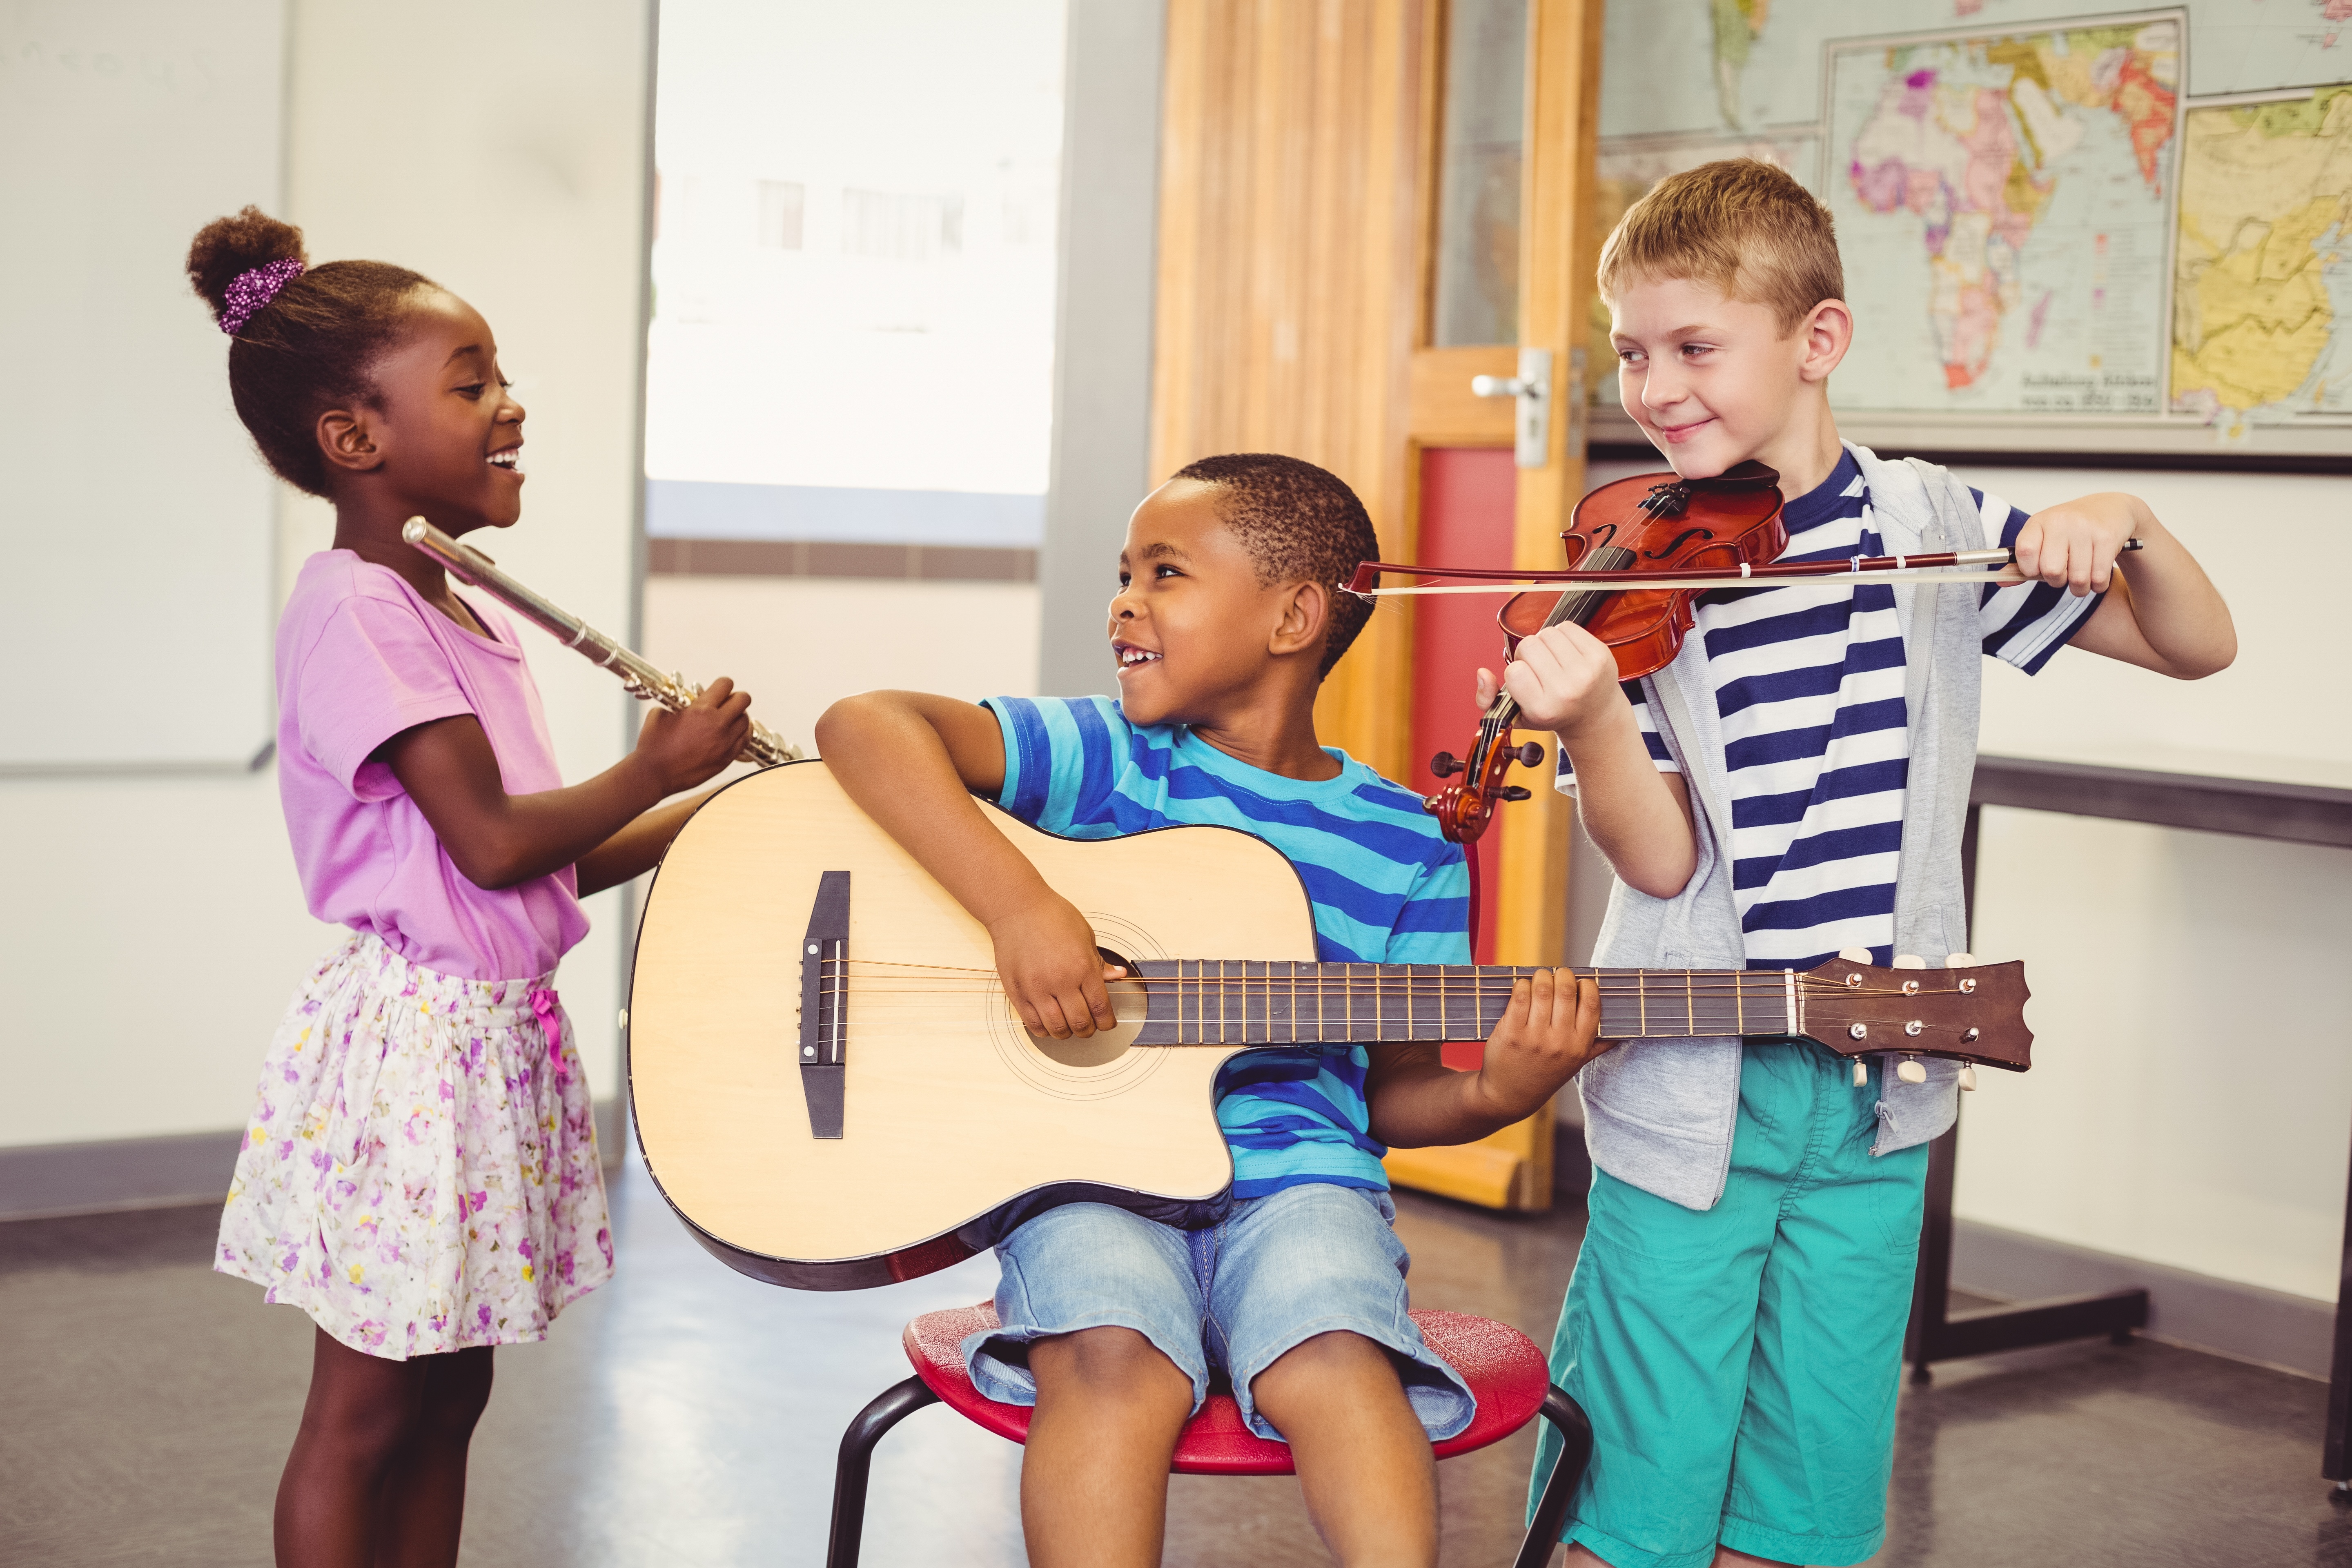 Children laughing and playing with musical instruments after taking a test